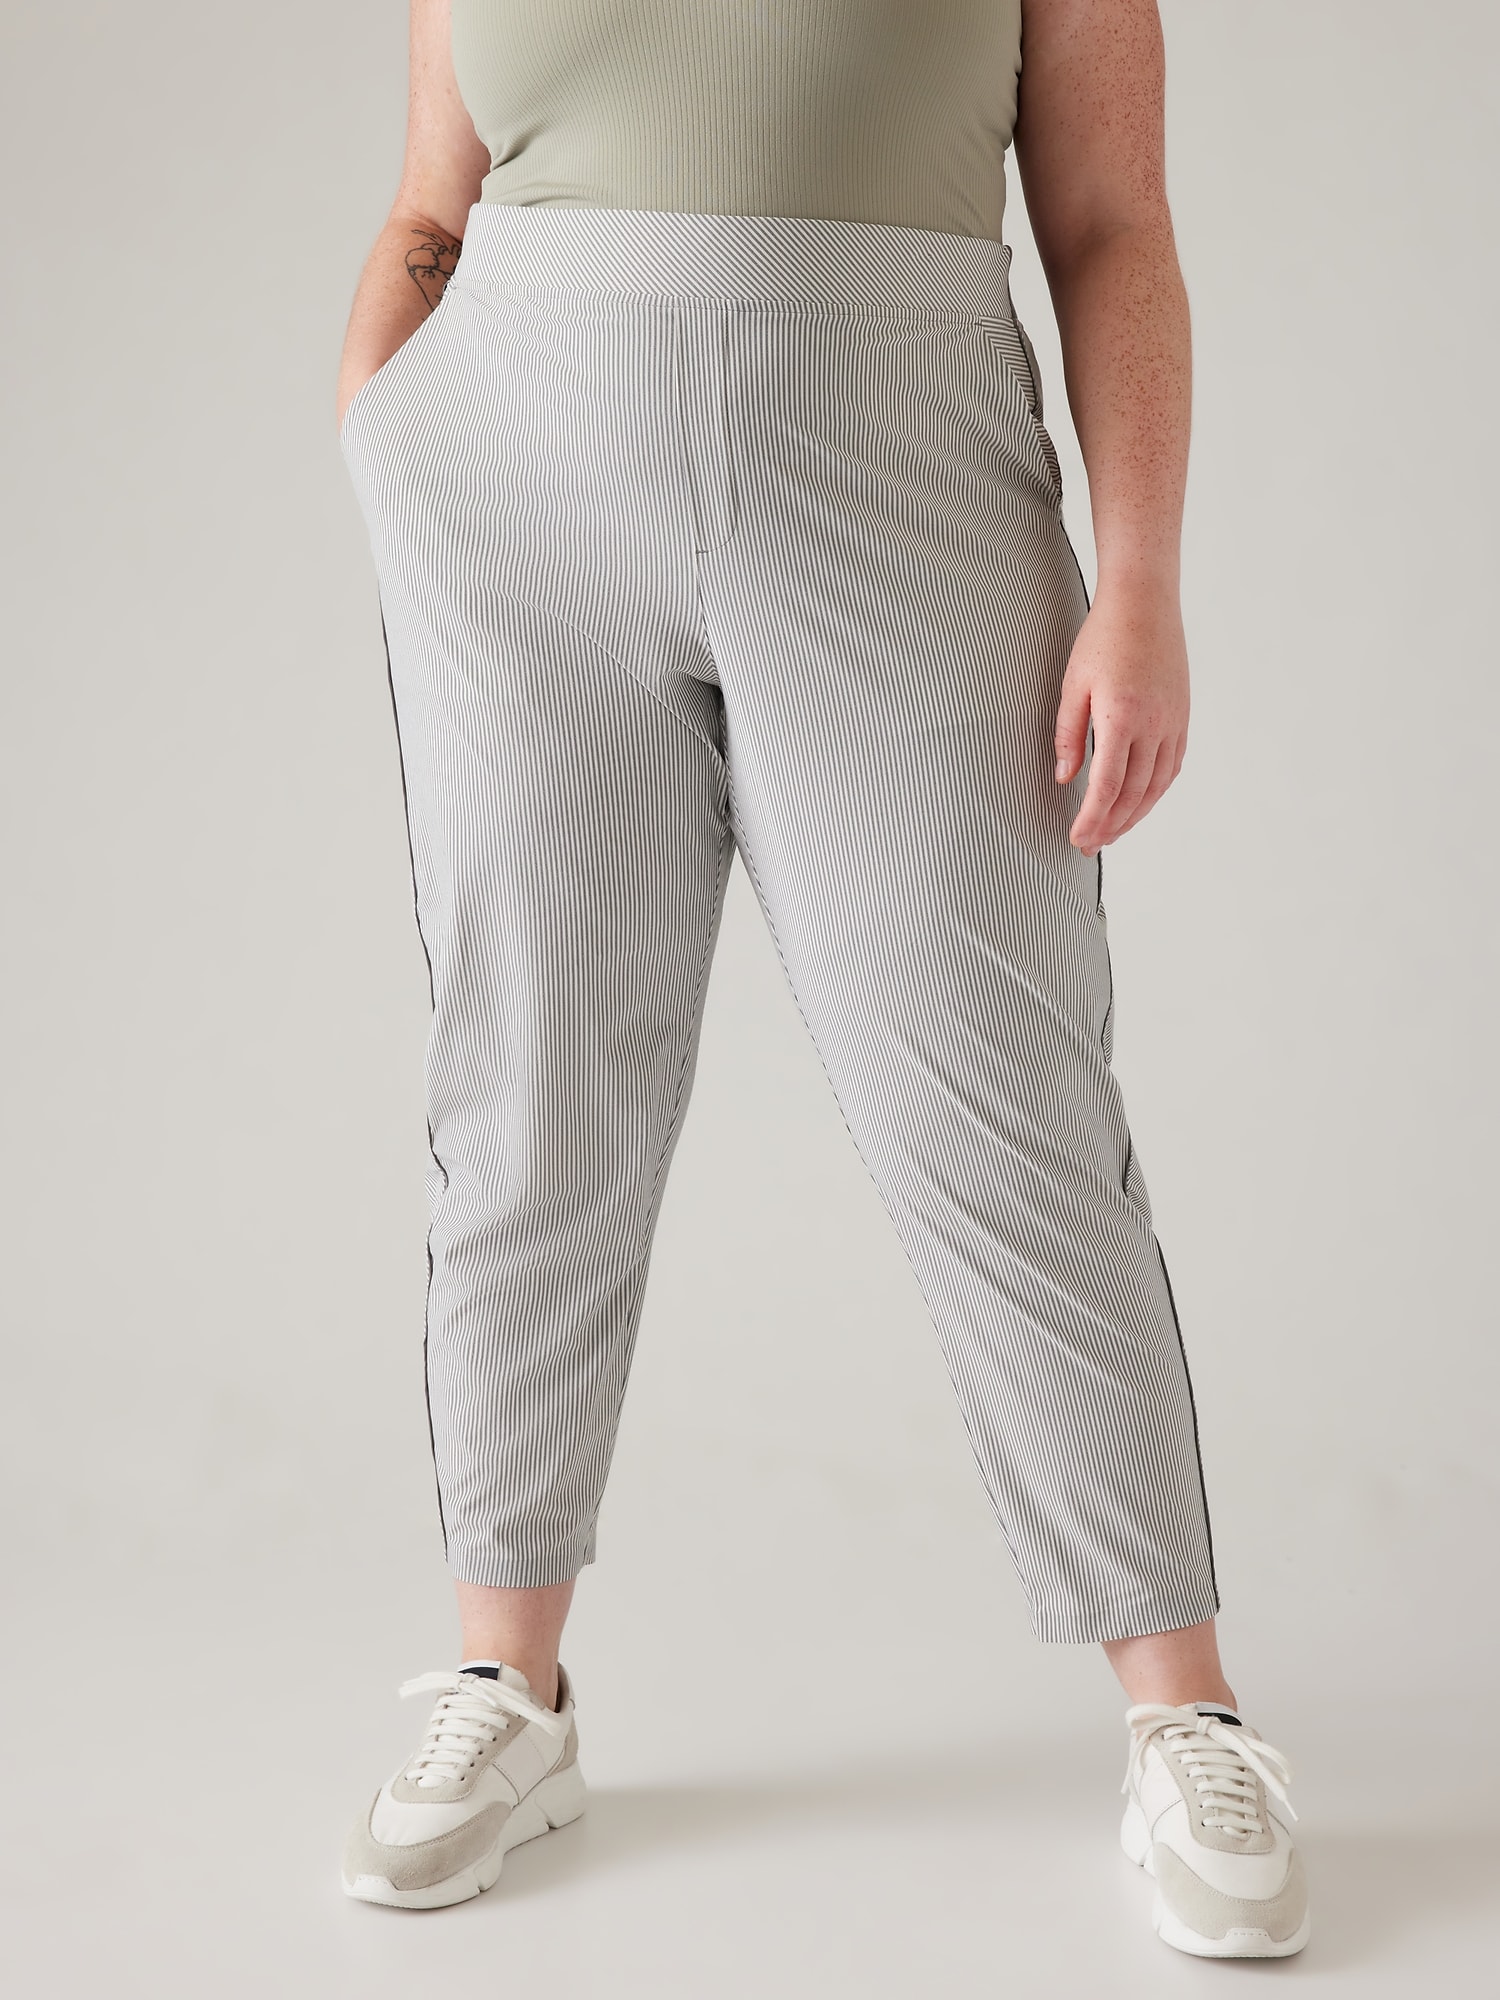 ATHLETA on X: Introducing the new Brooklyn Ankle Pant: Recycled fabric  that's lightweight, wrinkle resistant, easy to move in, and UPF 50+. Shop  now:   / X